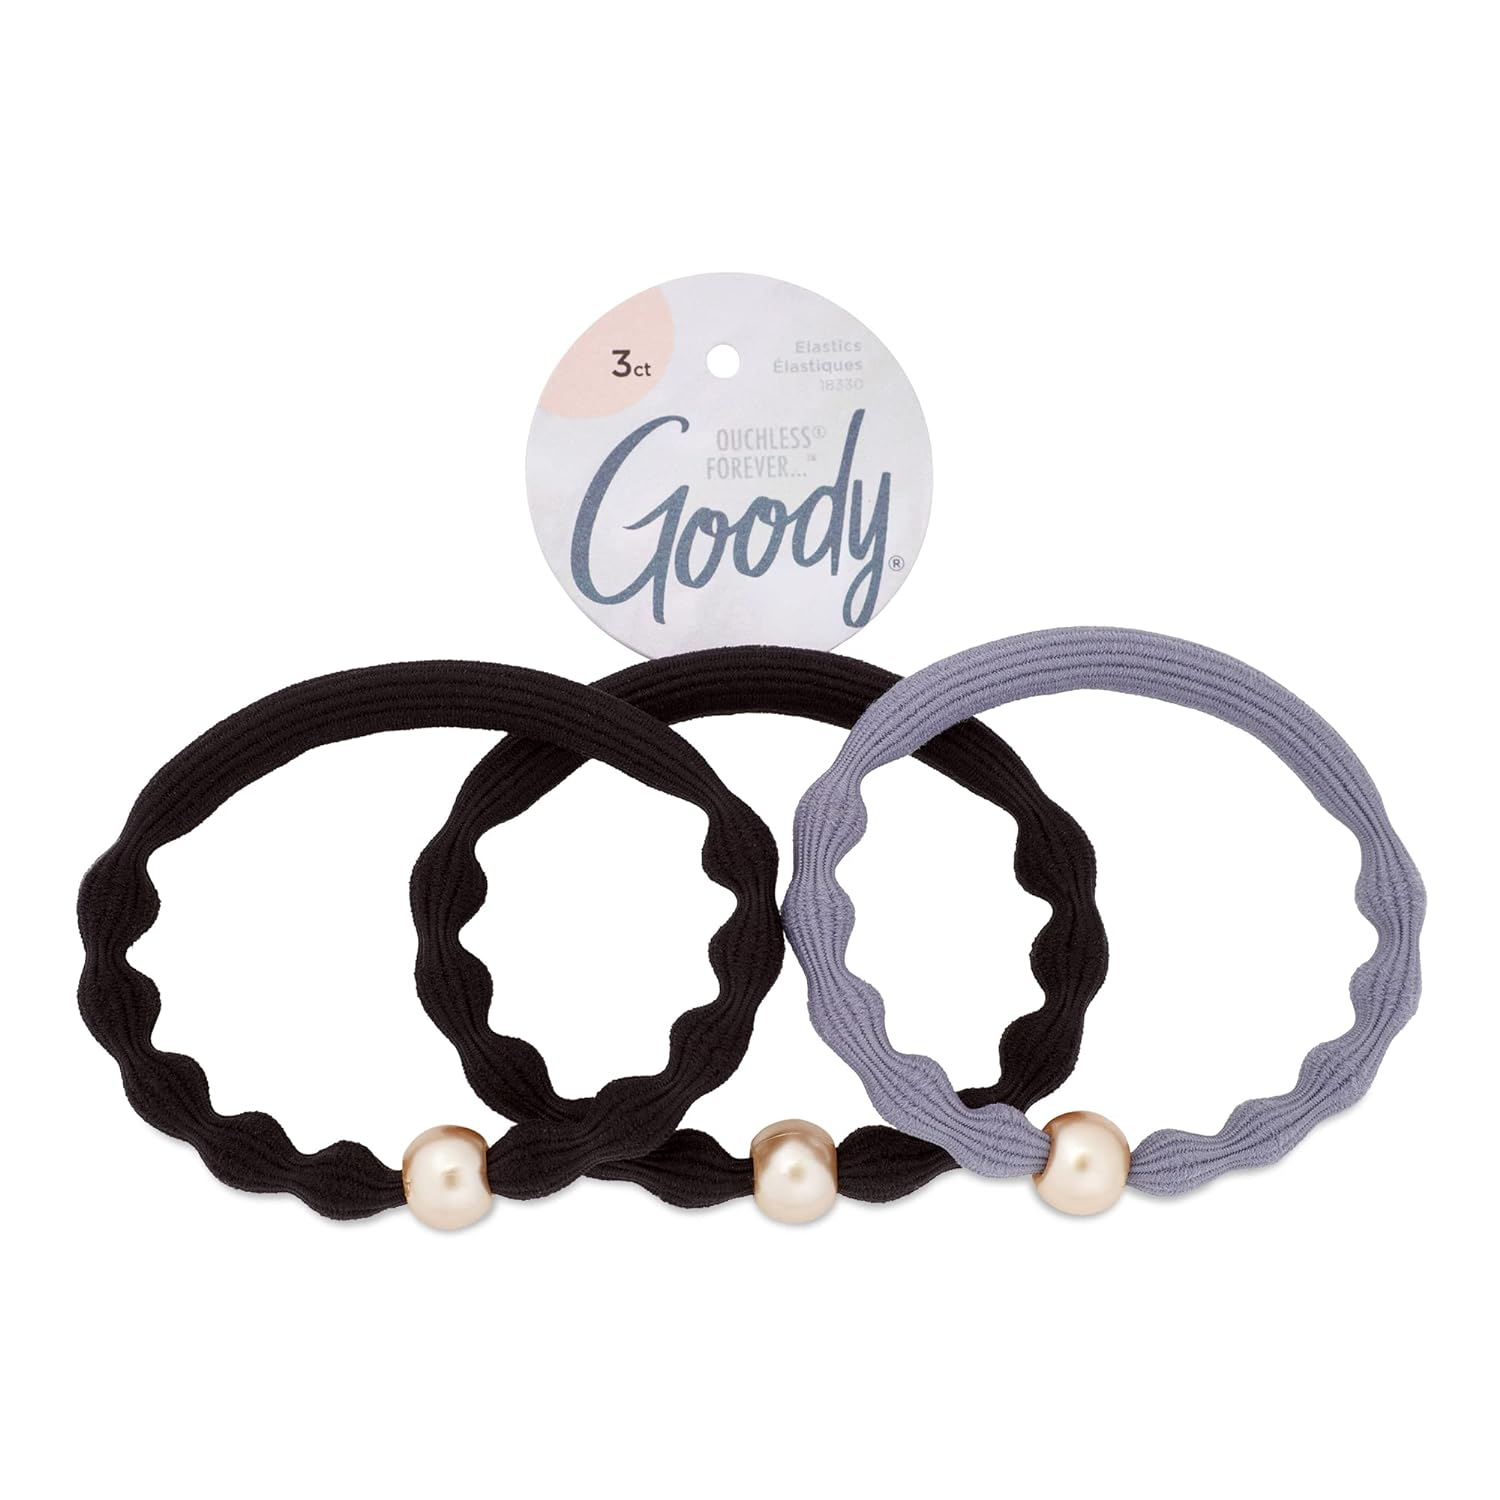 Goody Ouchless Forever Elastics - 3 Count, Winter Solstice Collection